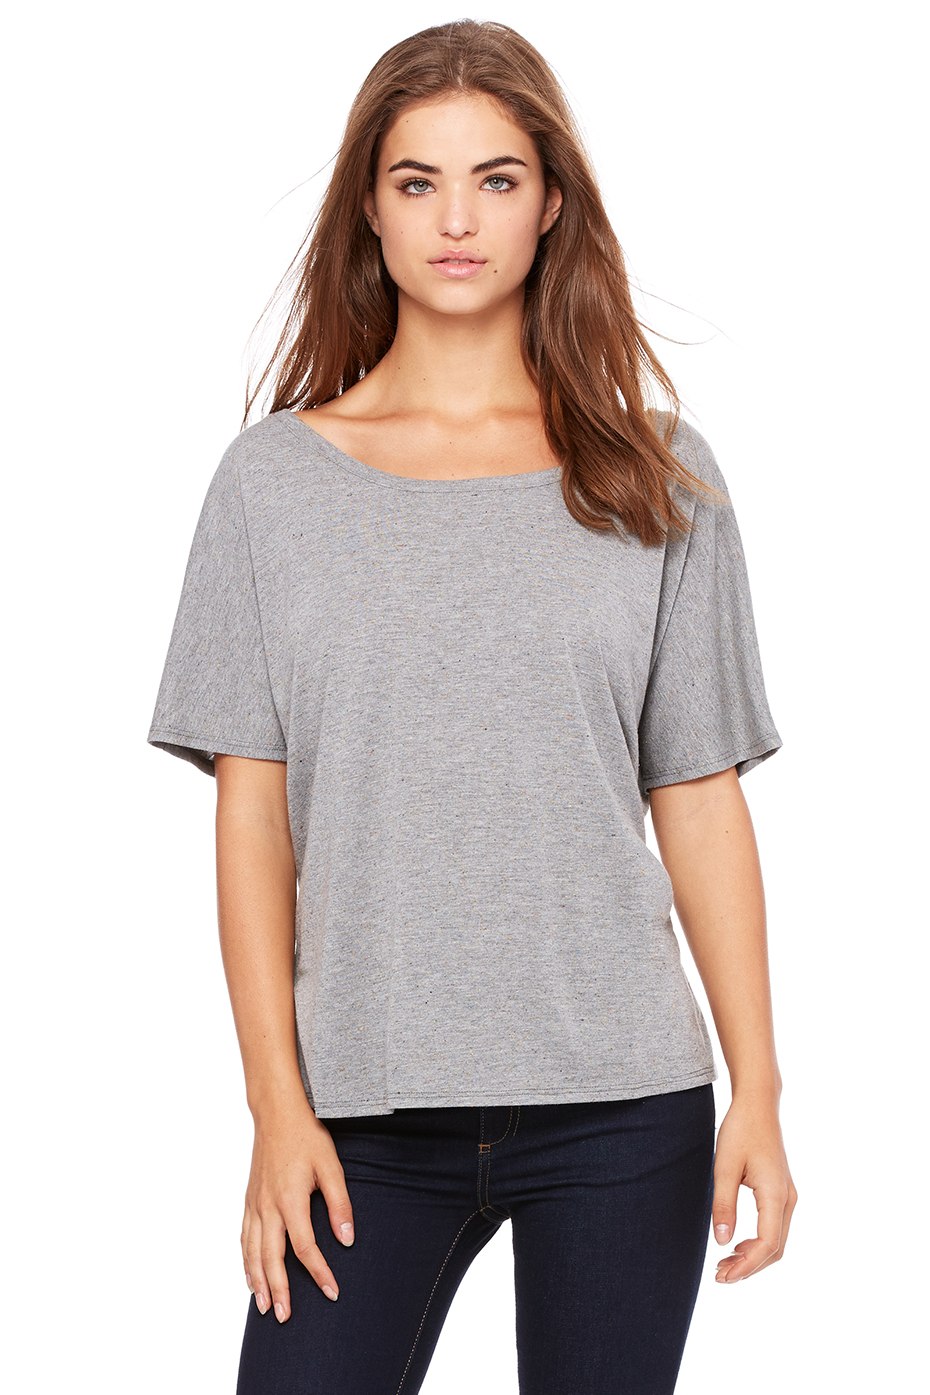 Slouchy tee project social services inc reviews